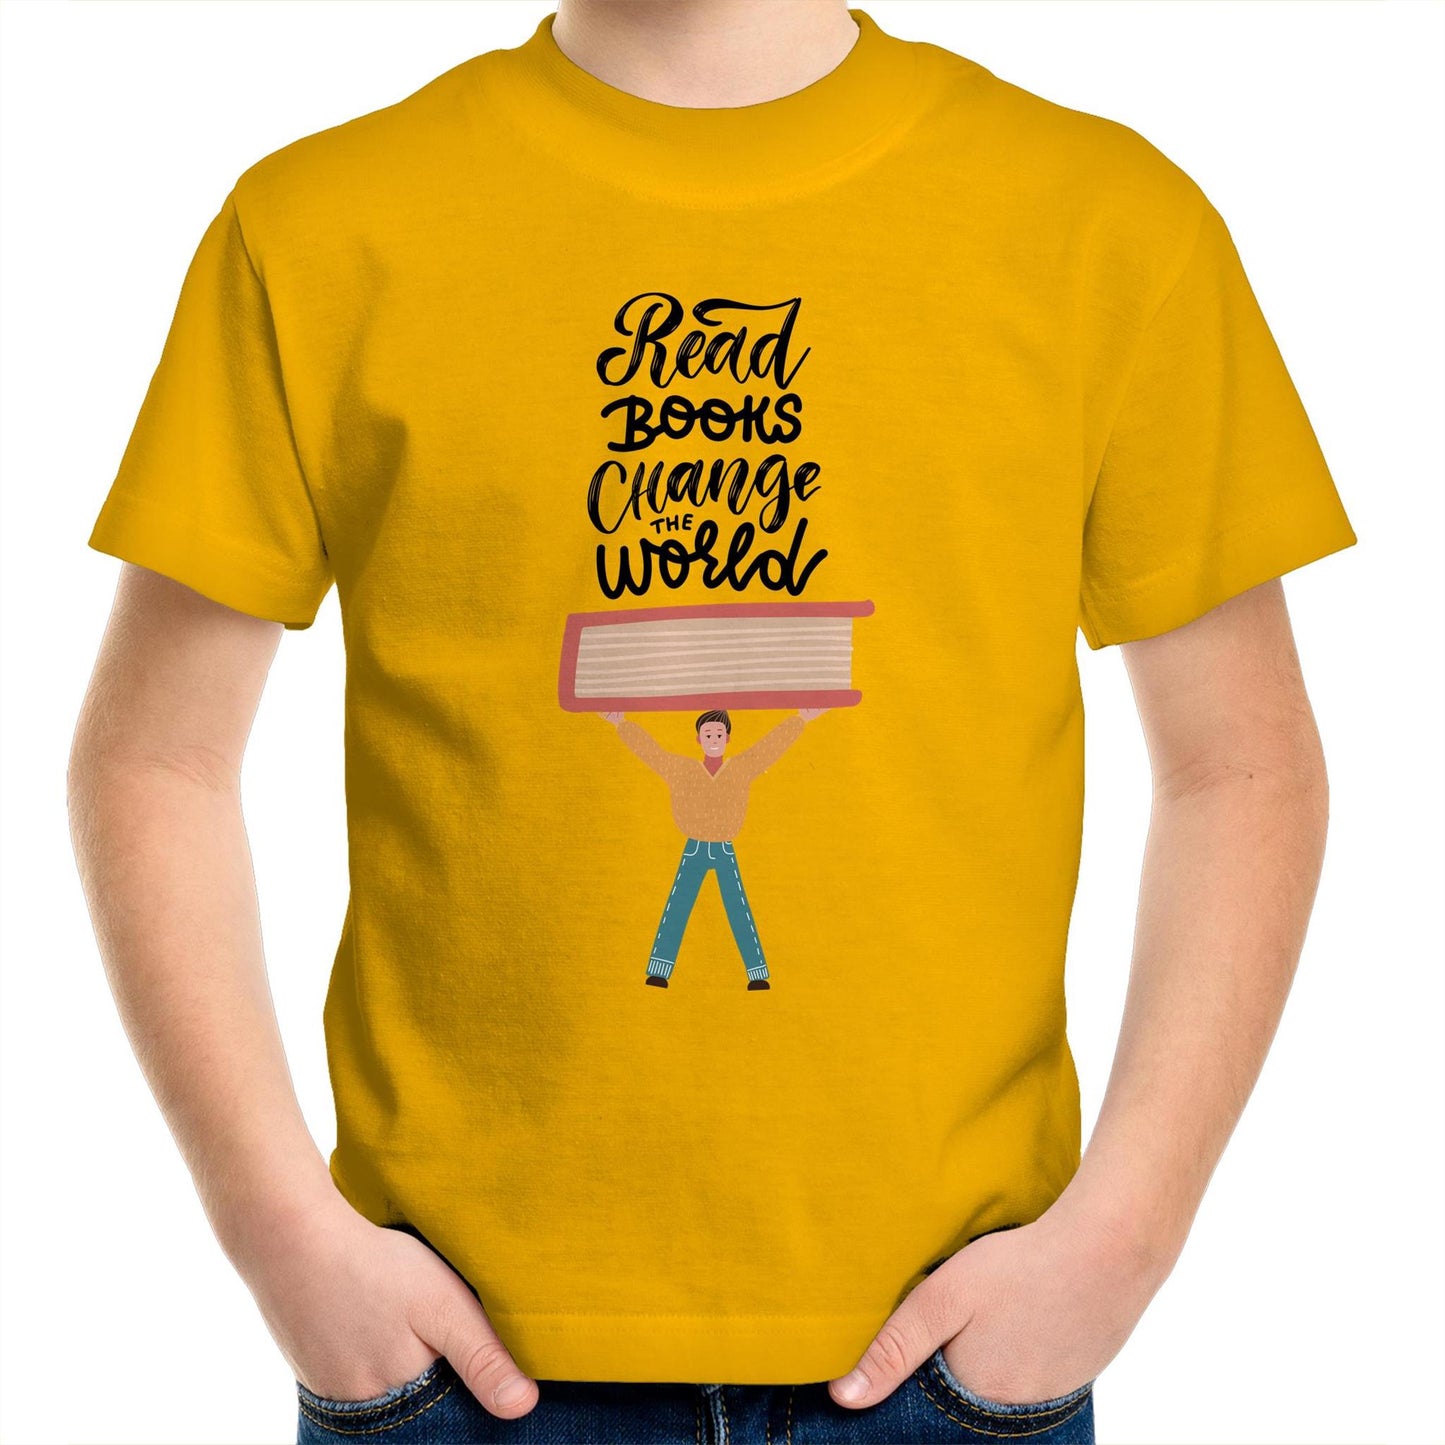 Read Books, Change The World - Kids Youth Crew T-Shirt Gold Kids Youth T-shirt Reading